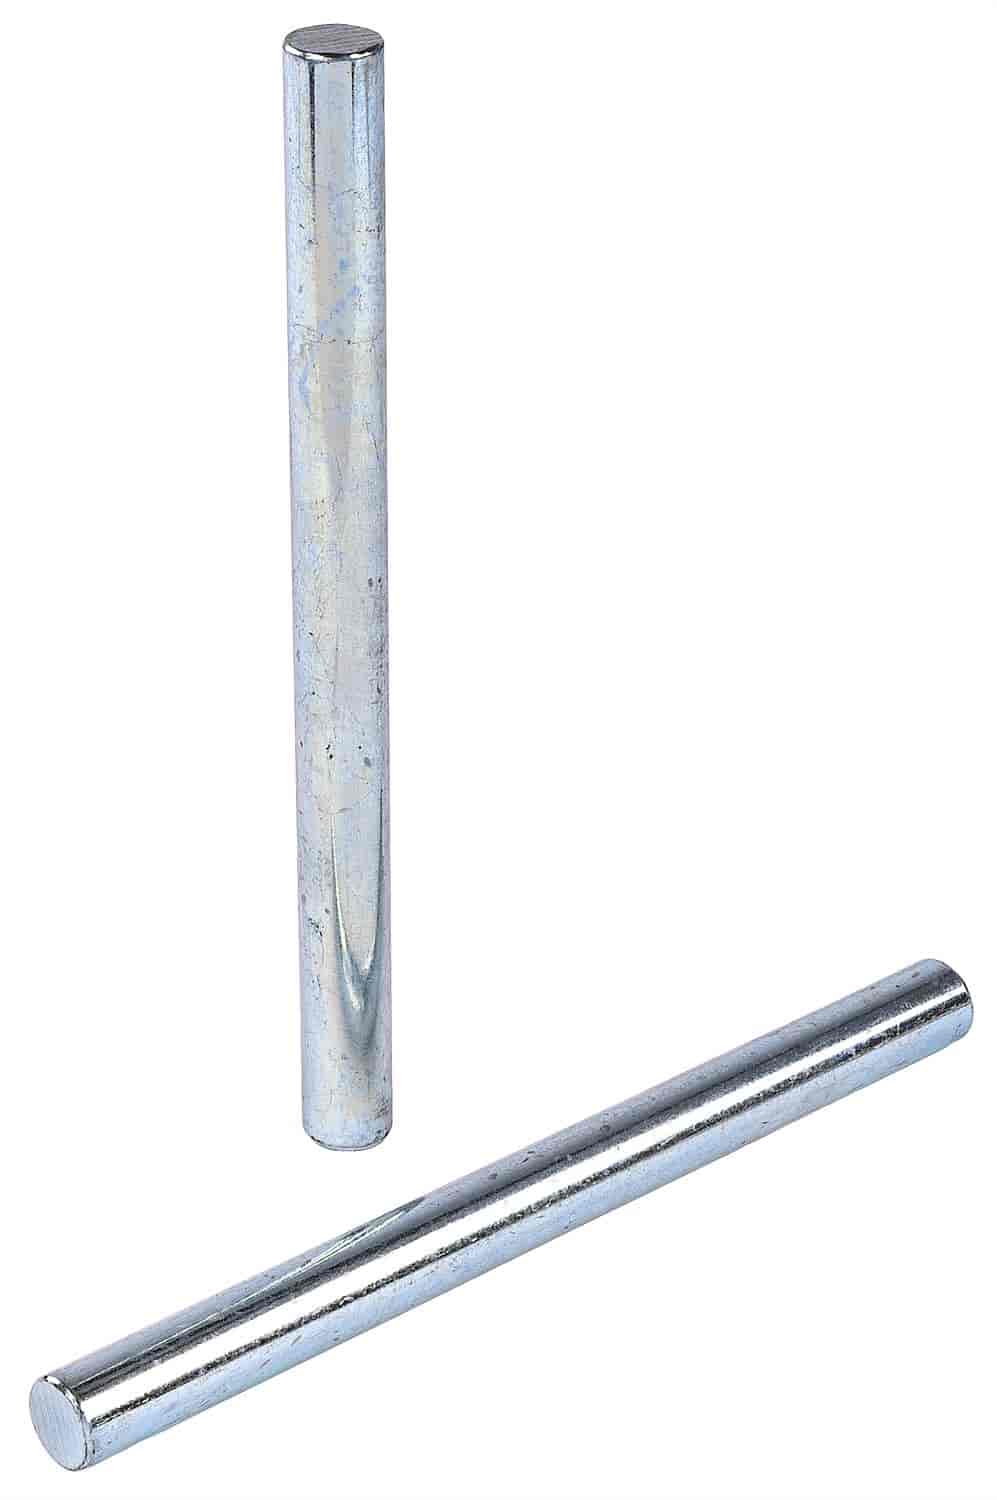 Replacement Pins For Hydraulic Shop Press with Pressure